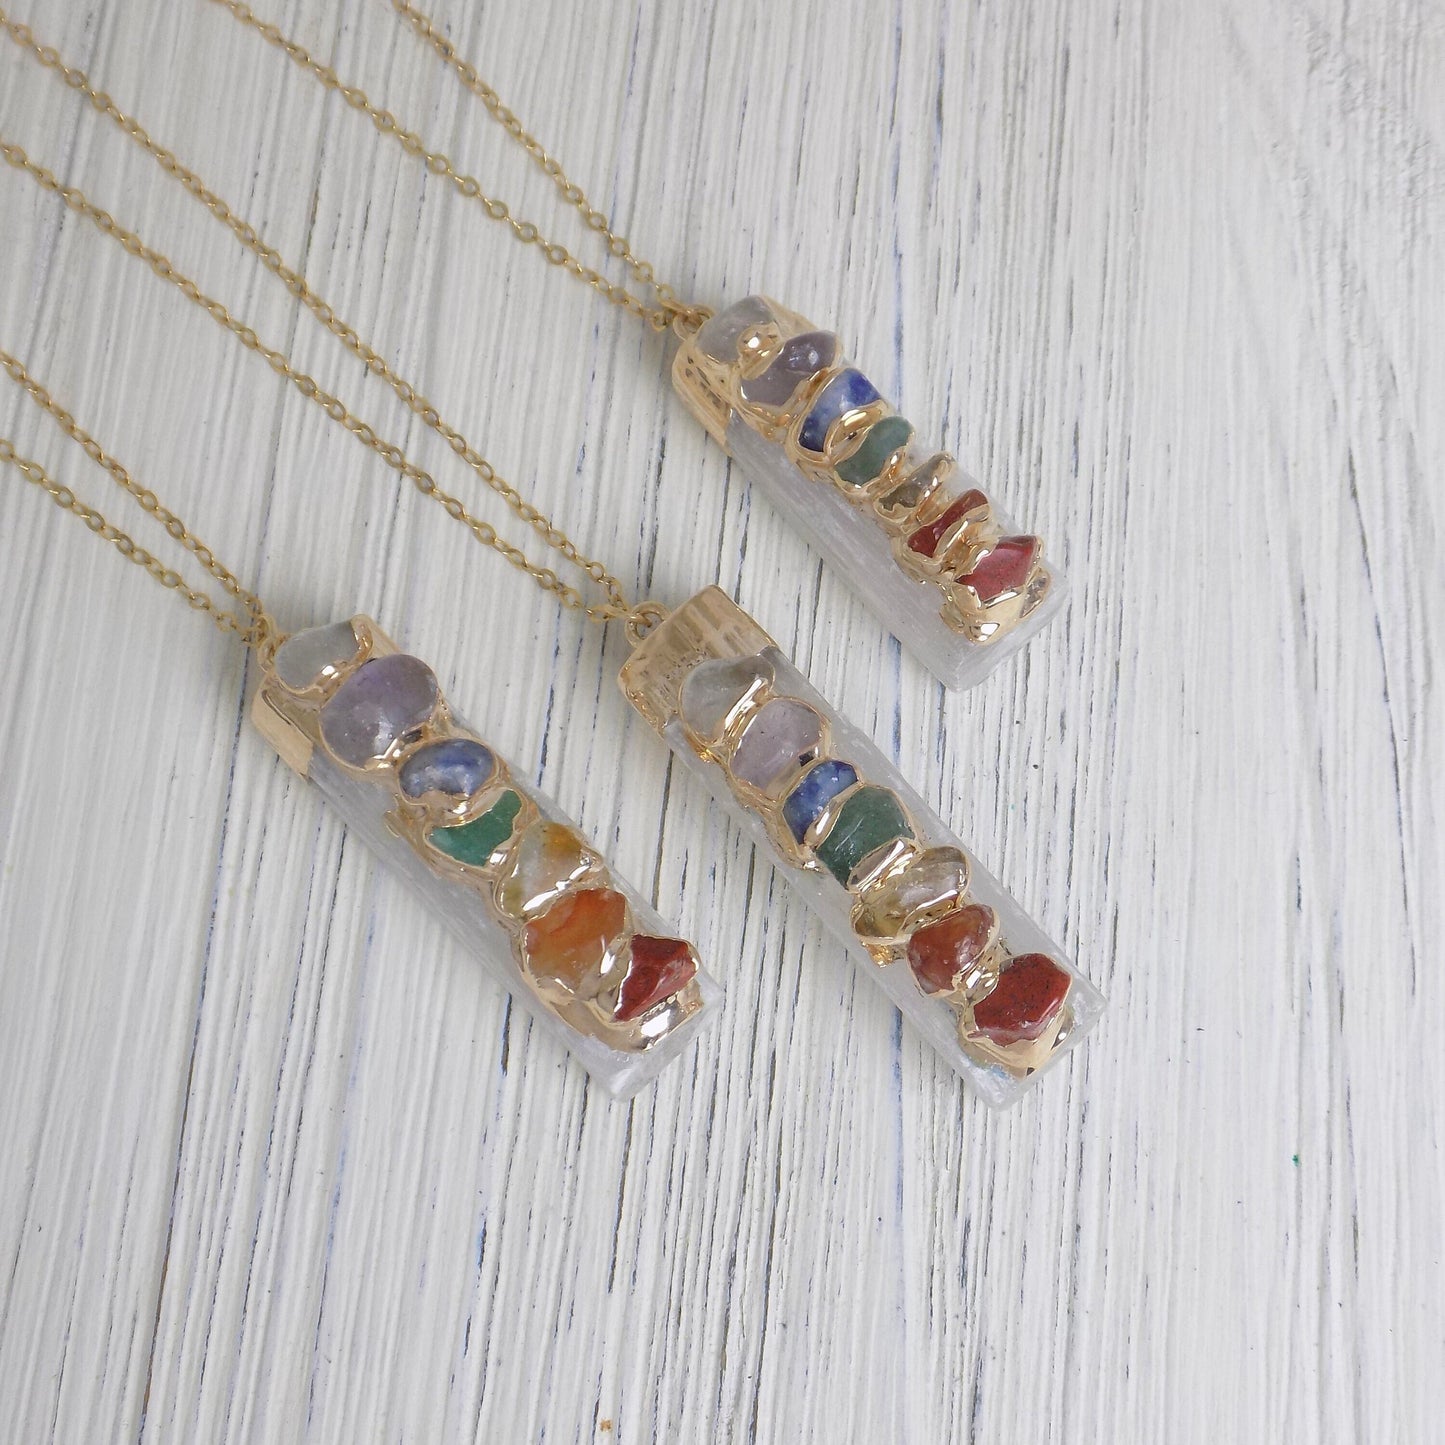 Gold Chakra Necklace, 7 Chakra Necklace, Raw Crystal Necklace Selenite Healing Crystals Yoga Jewelry Boho Necklace Long Unique Gifts G13-122